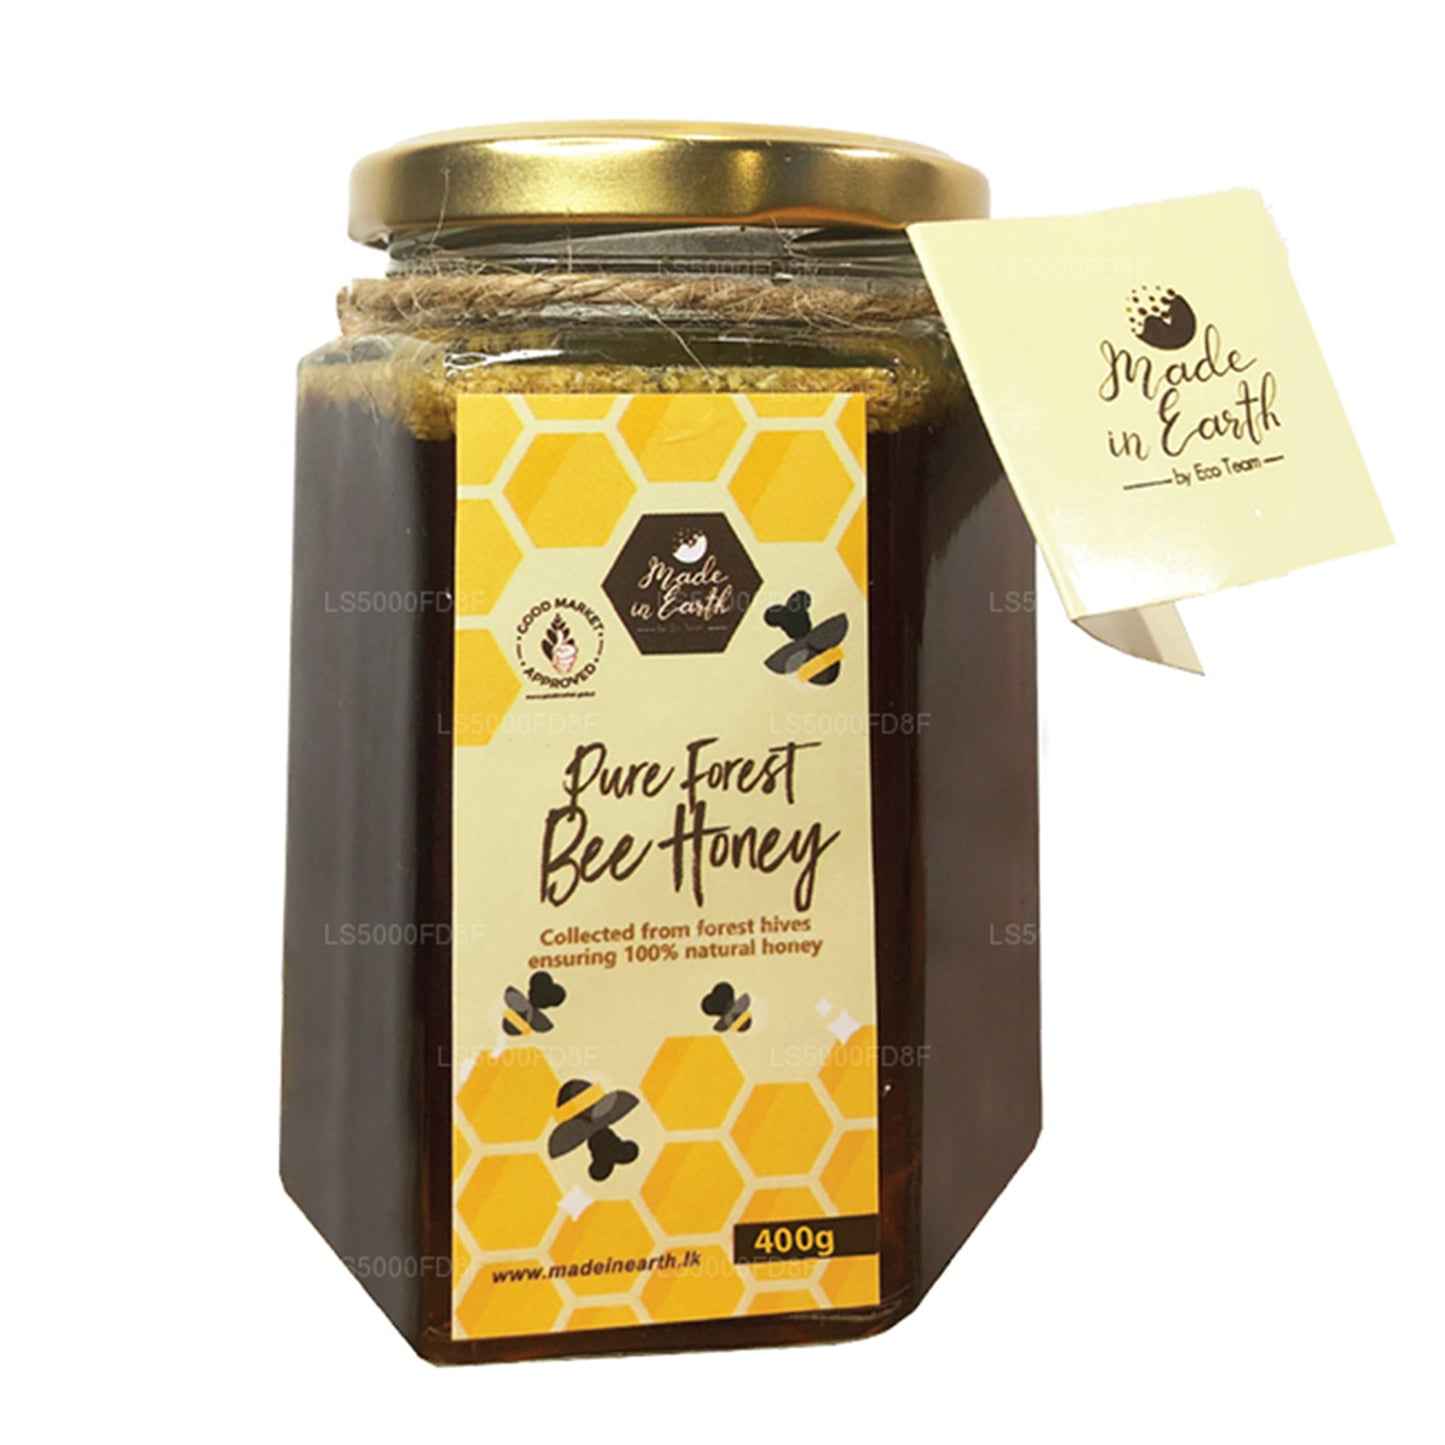 Made In Earth Pure Forest Bee Miód (400g)